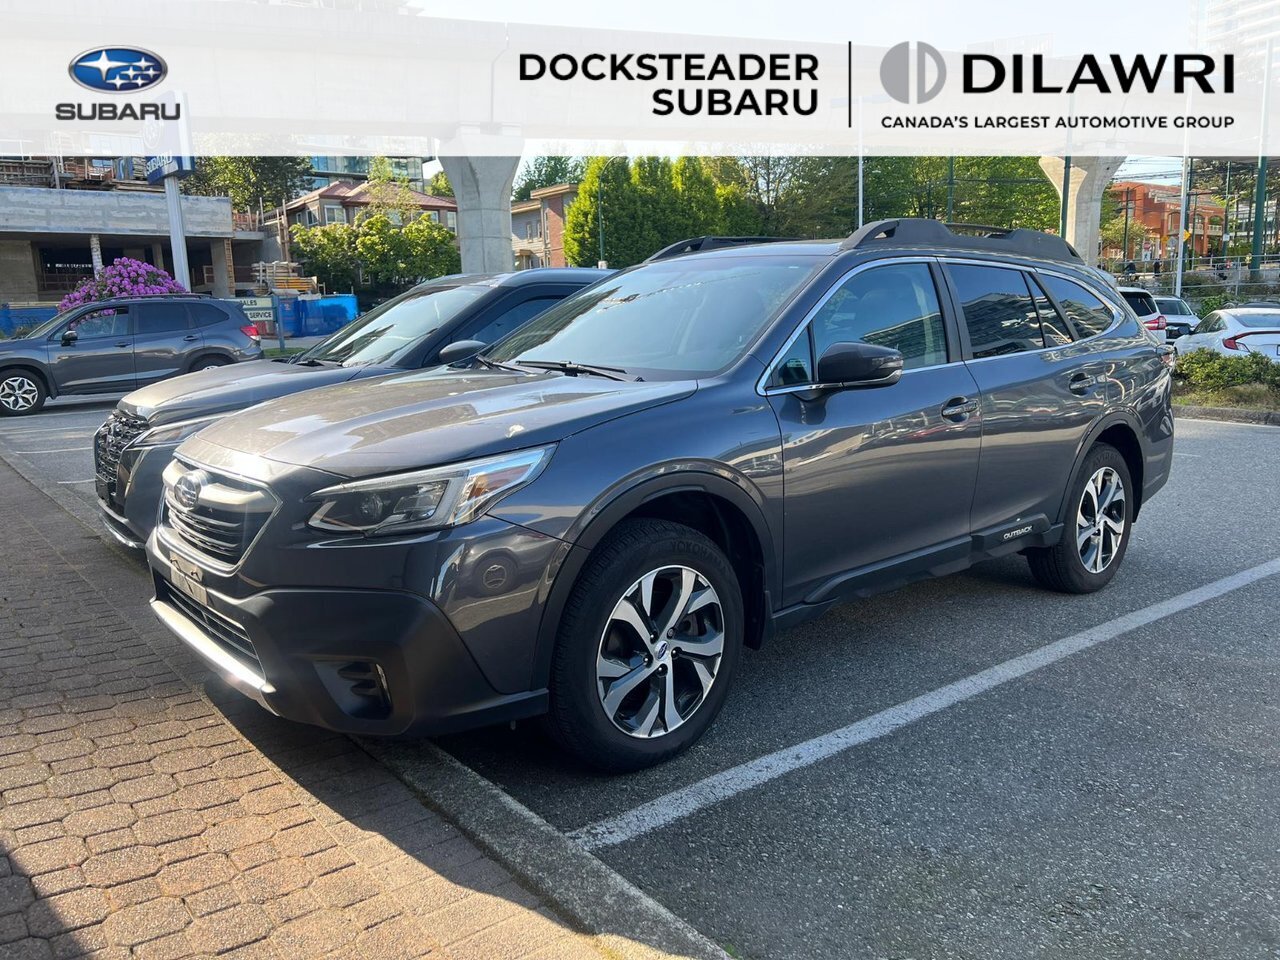 2020 Subaru Outback 2.4L Limited XT Turbo | Accident-Free | Great Cond